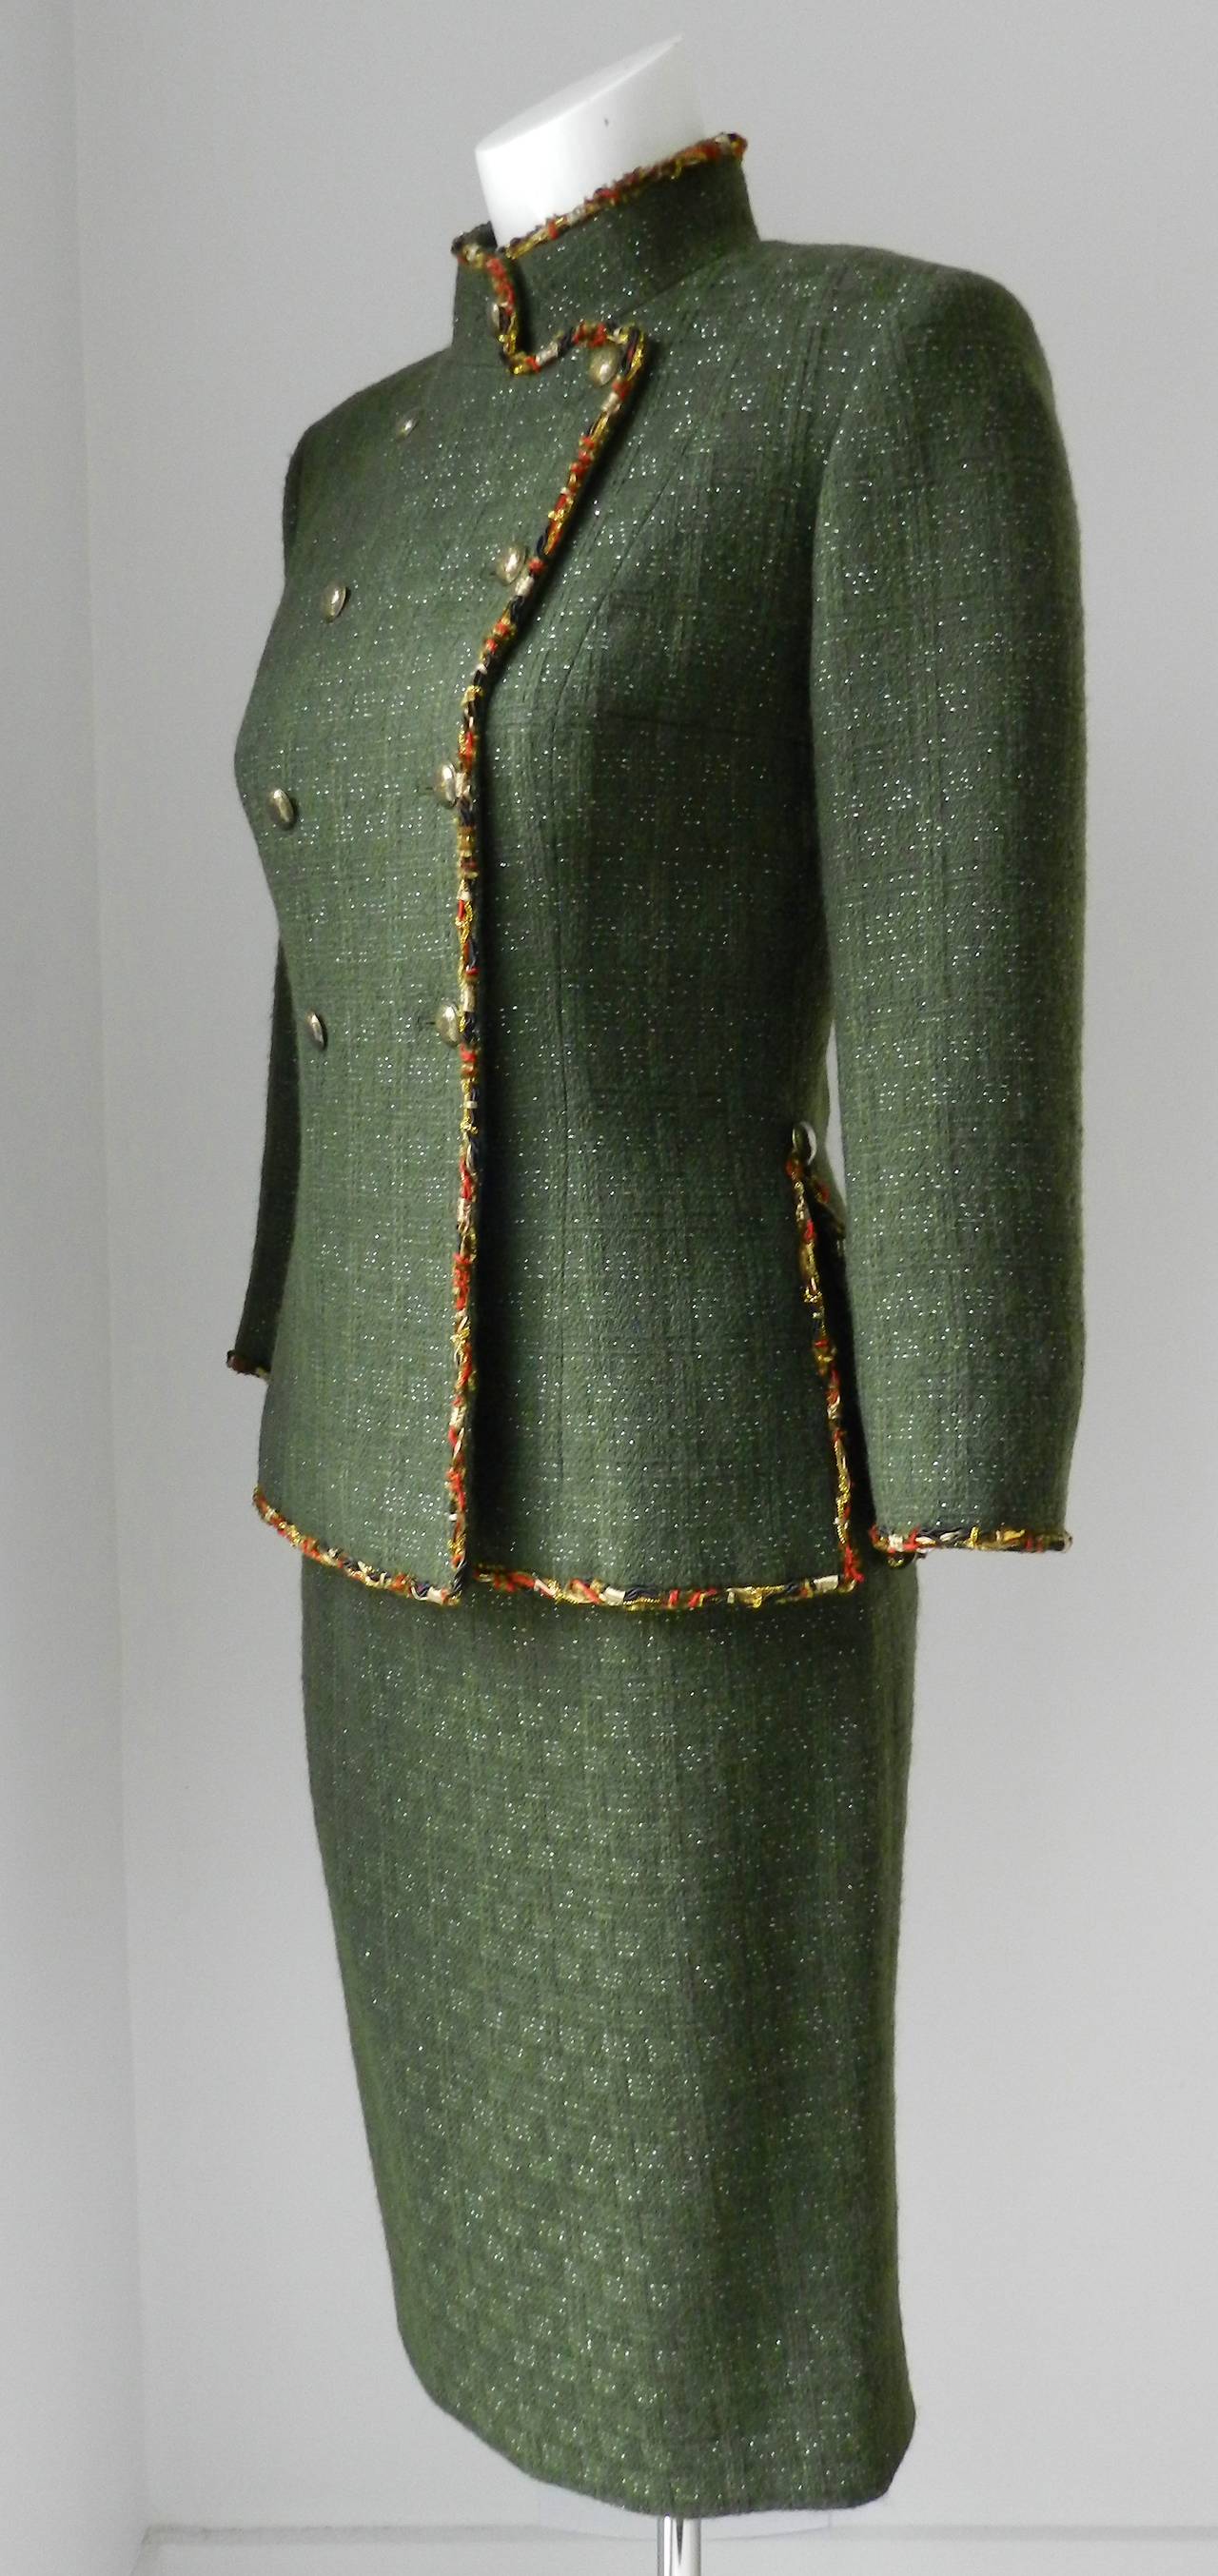 Chanel 2010 pre-fall Shanghai runway collection skirt suit. Dark green with gold/red trim. Enamel round buttons, fitted pencil skirt, high collar. Excellent condition - worn once. Tagged size FR 38 (USA 4/6). To fit 34